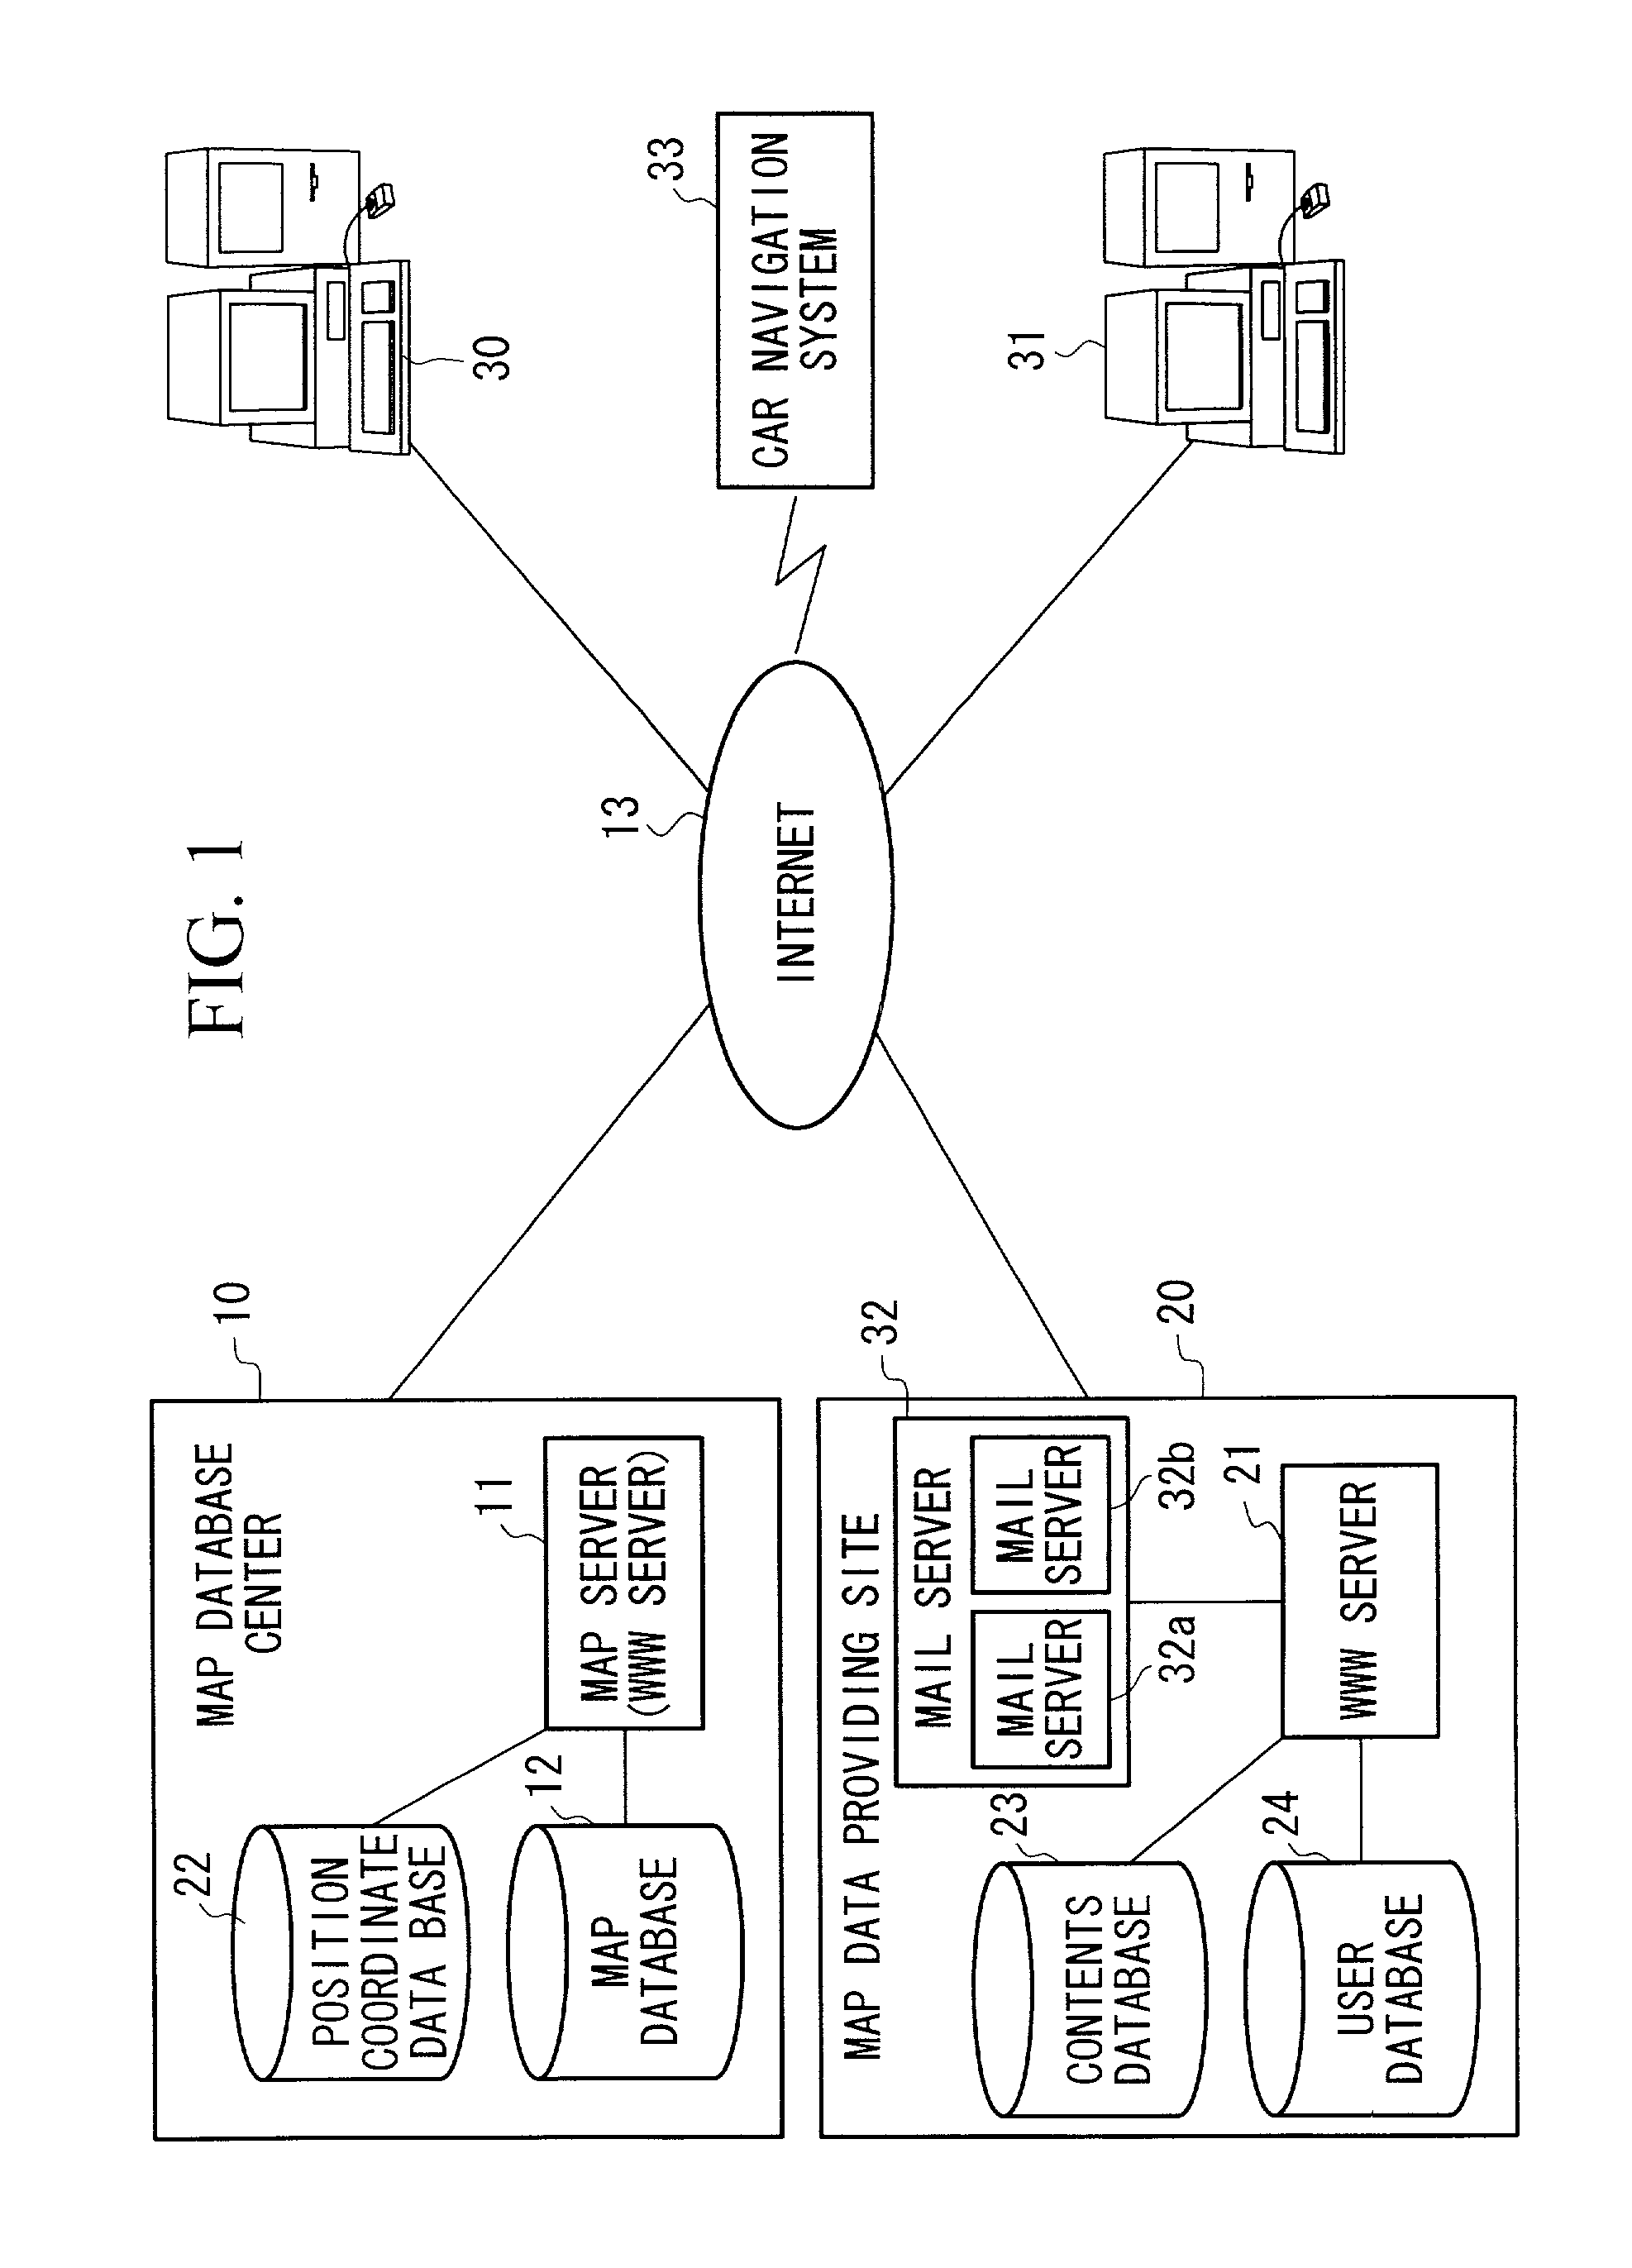 System for sending and receiving e-mail to which a plurality of positional data are attachable